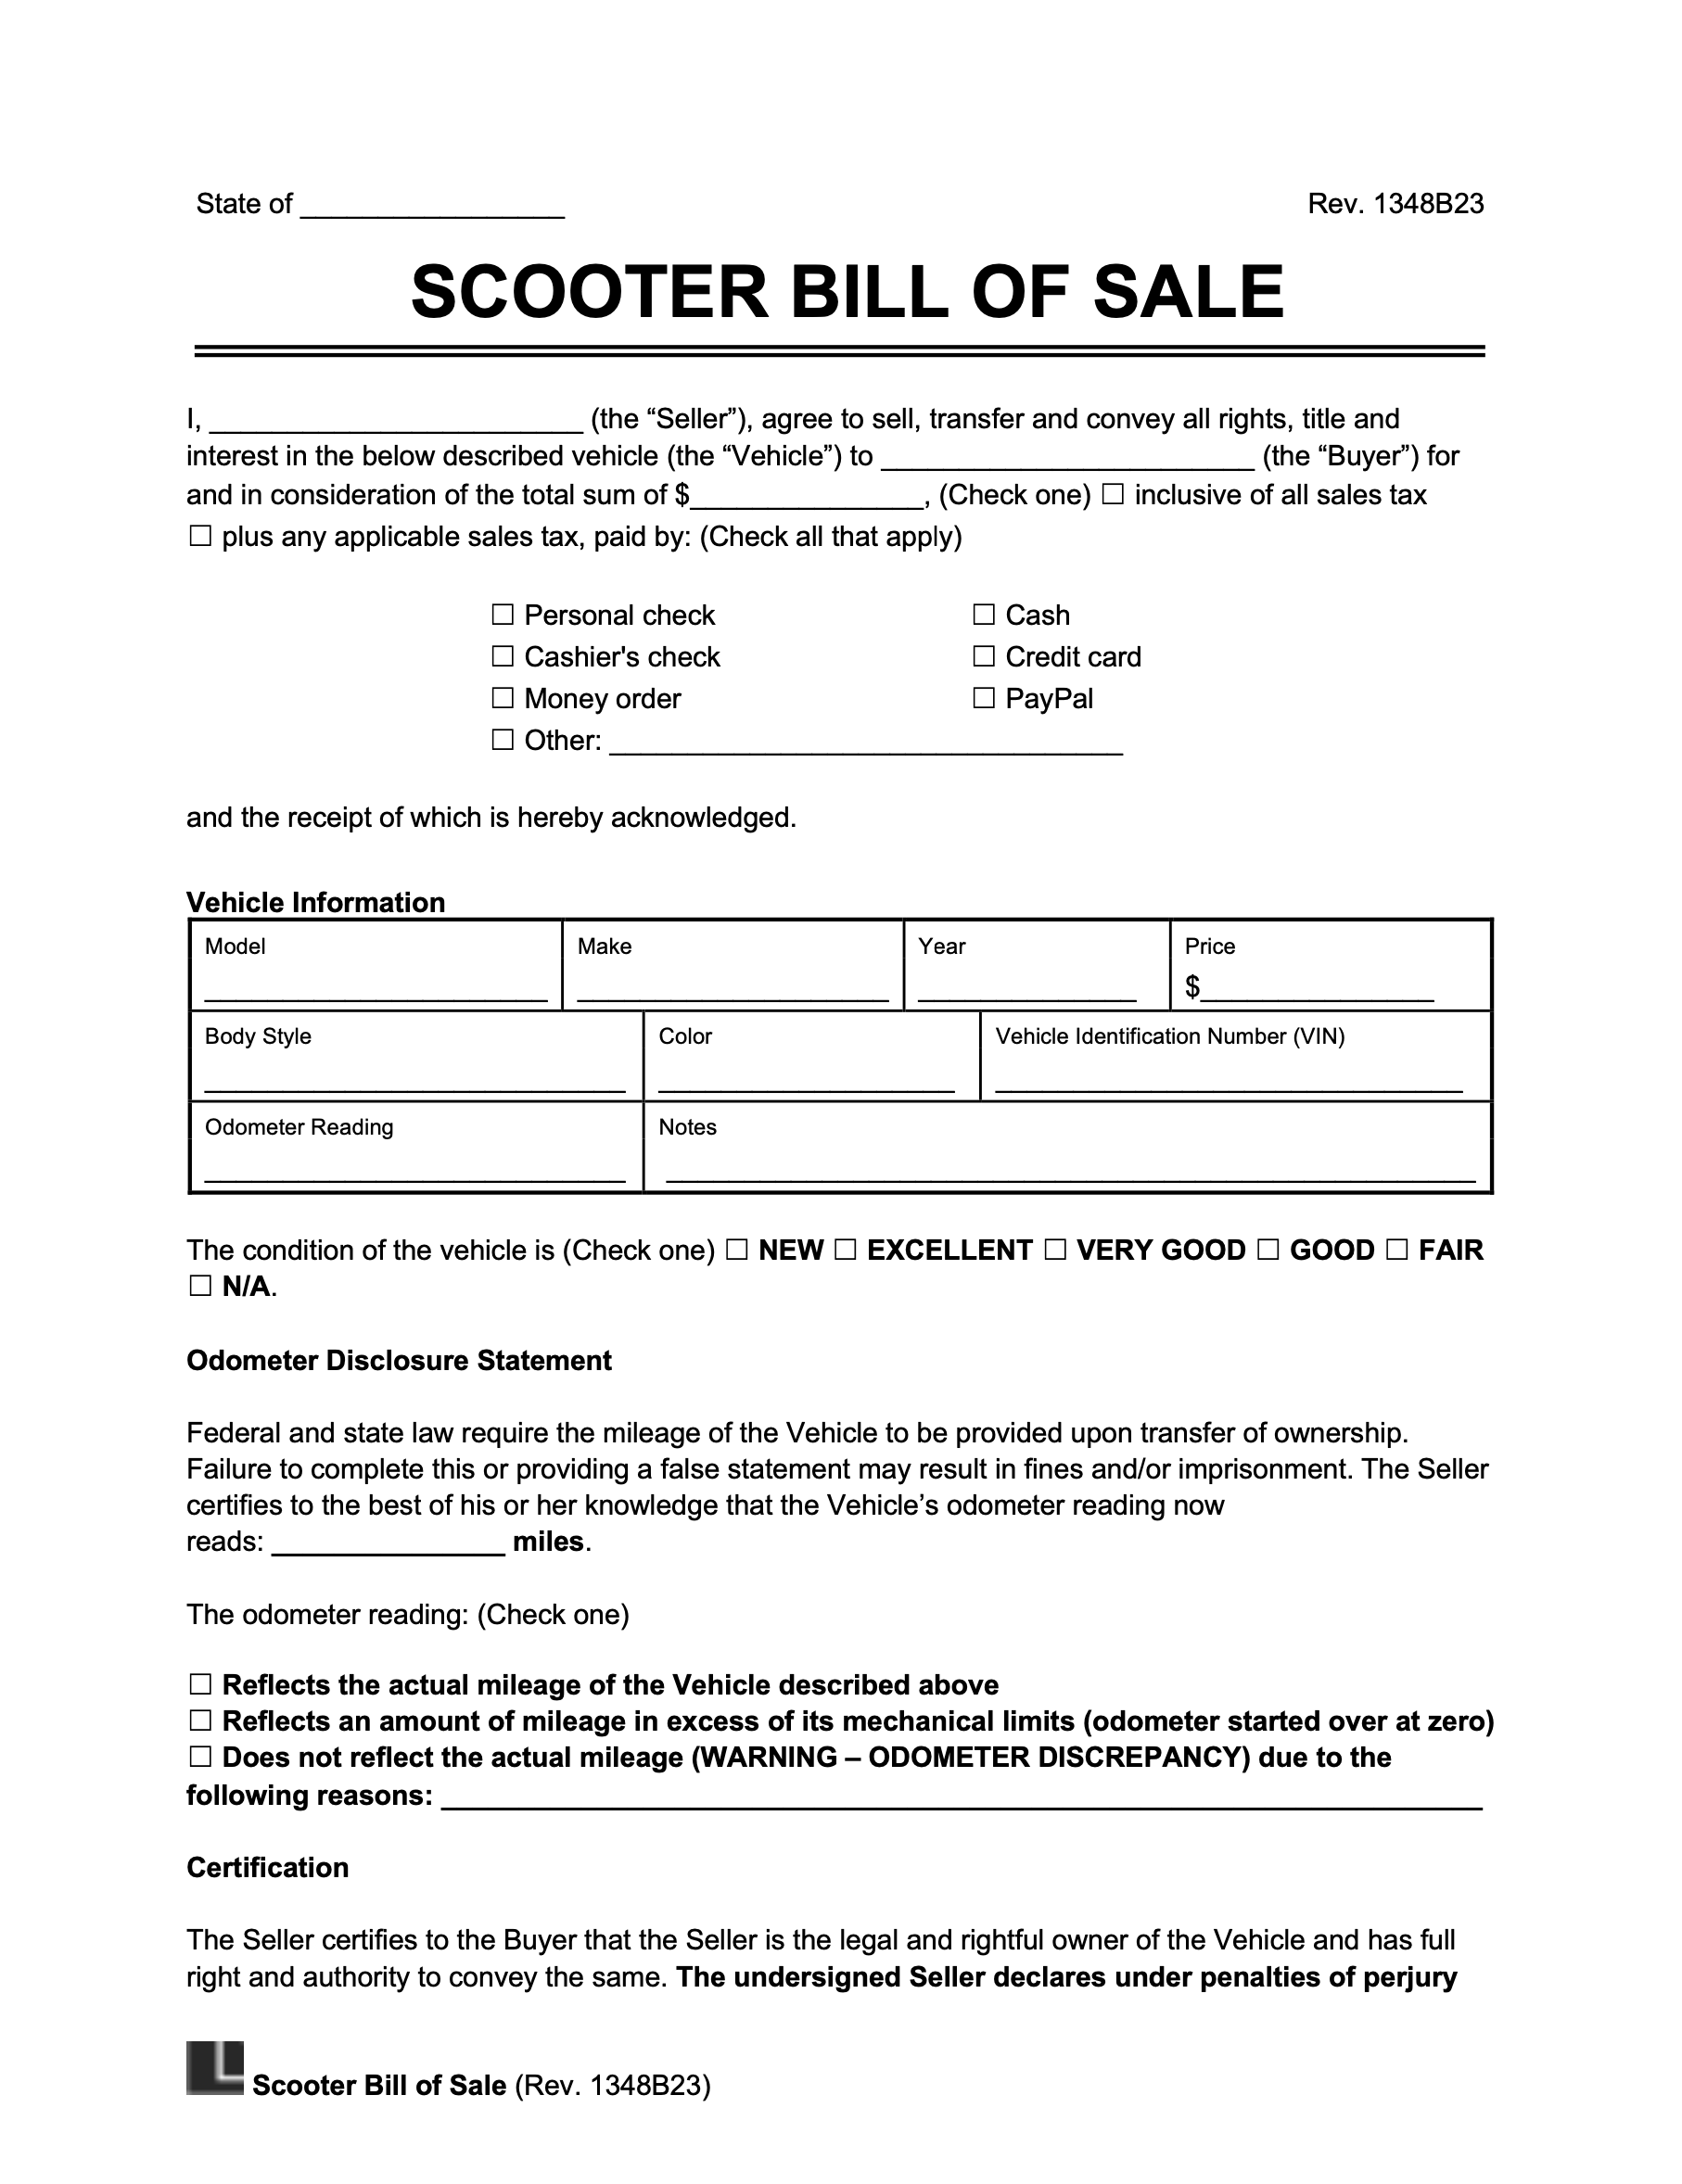 scooter bill of sale